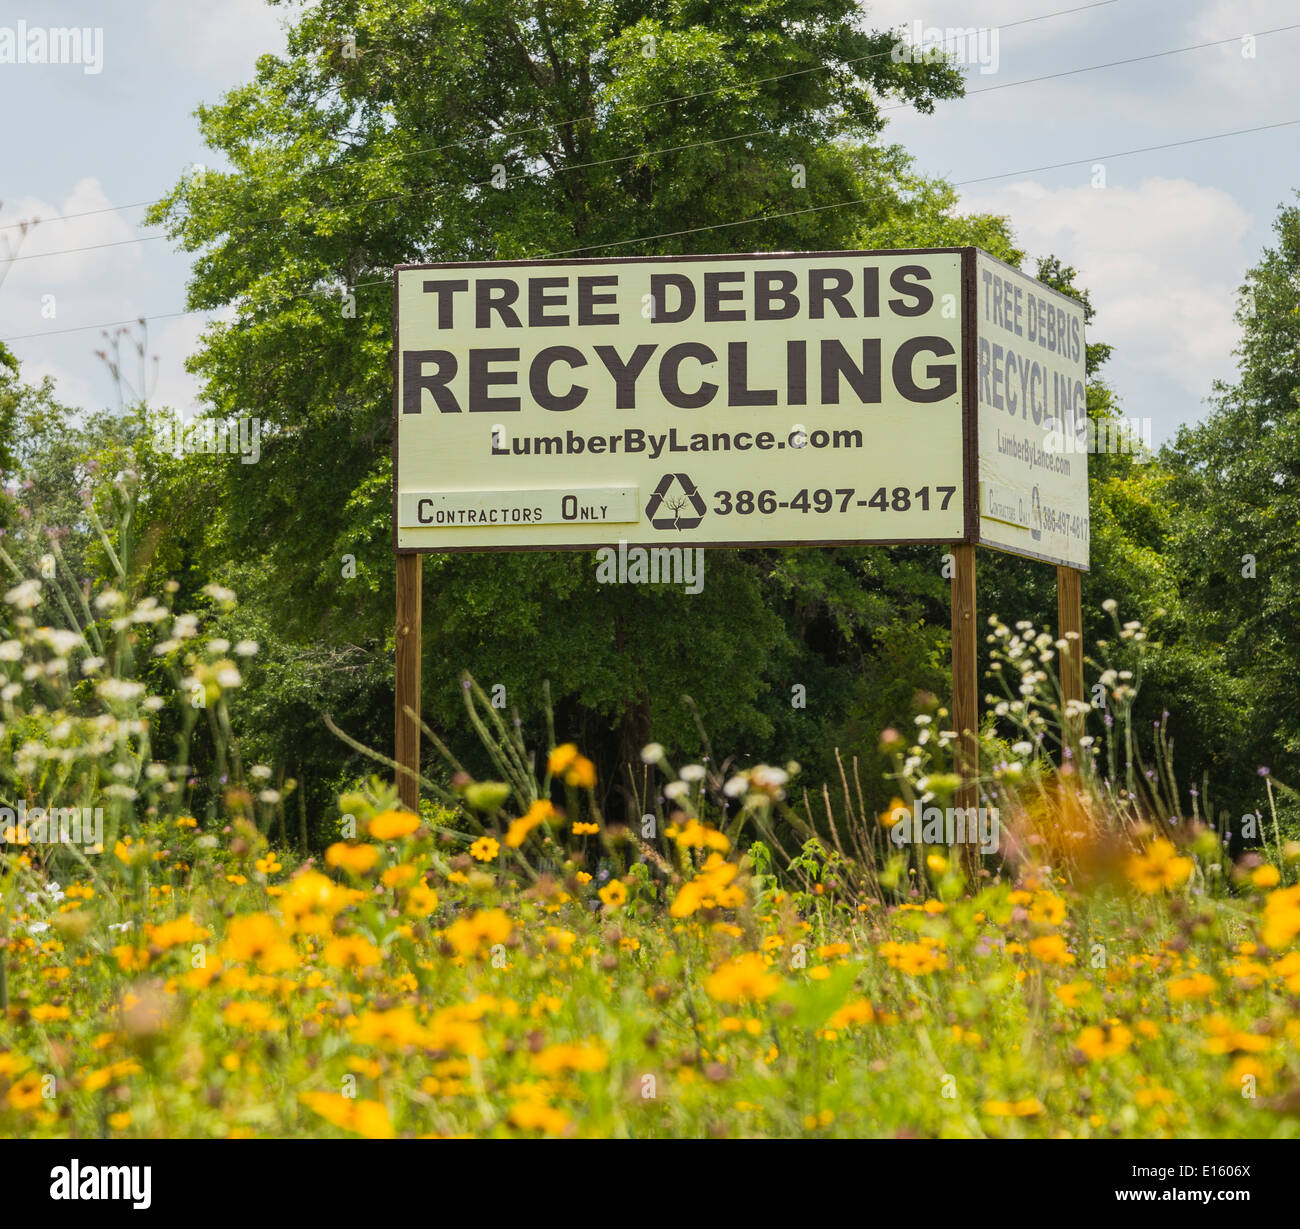 Sign for recycling of tree debris in North Central Florida. Stock Photo